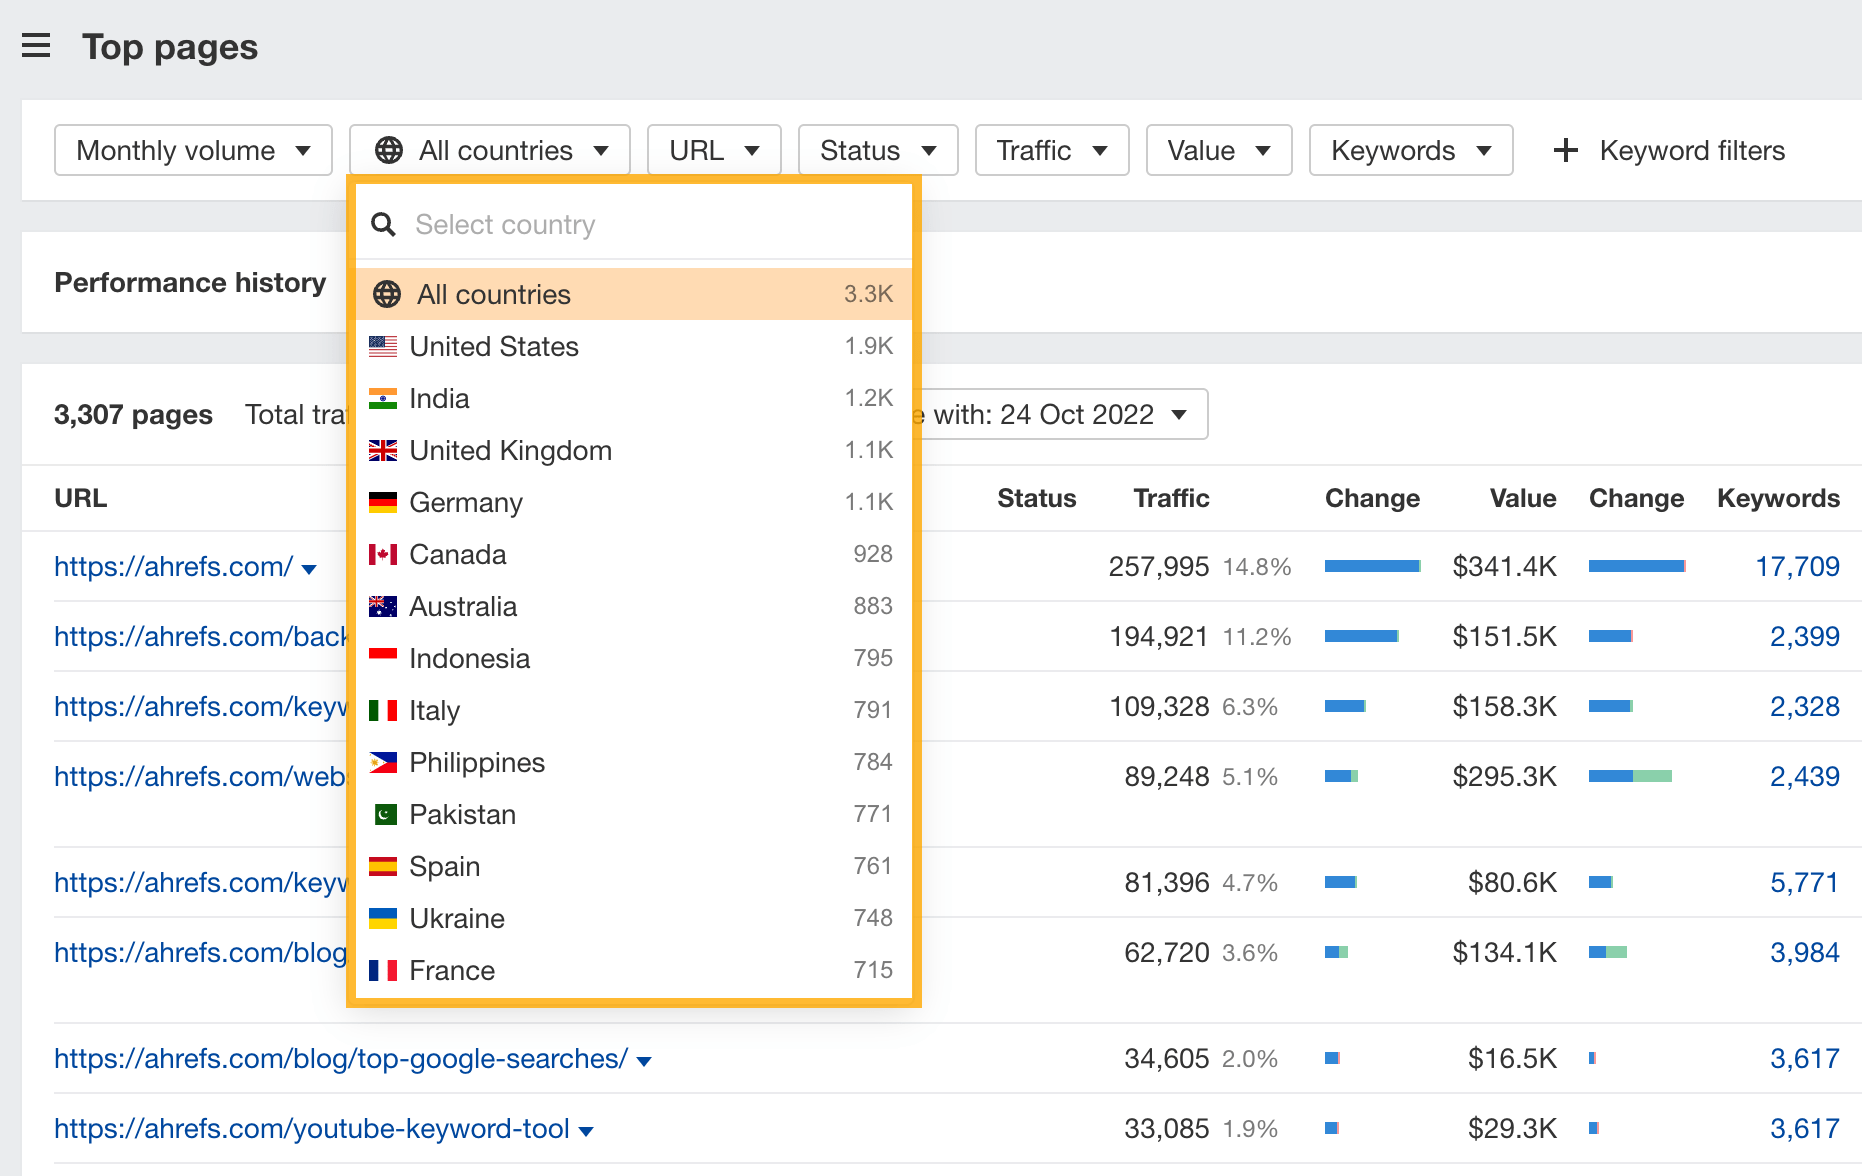 Countries dropdown in Top pages report